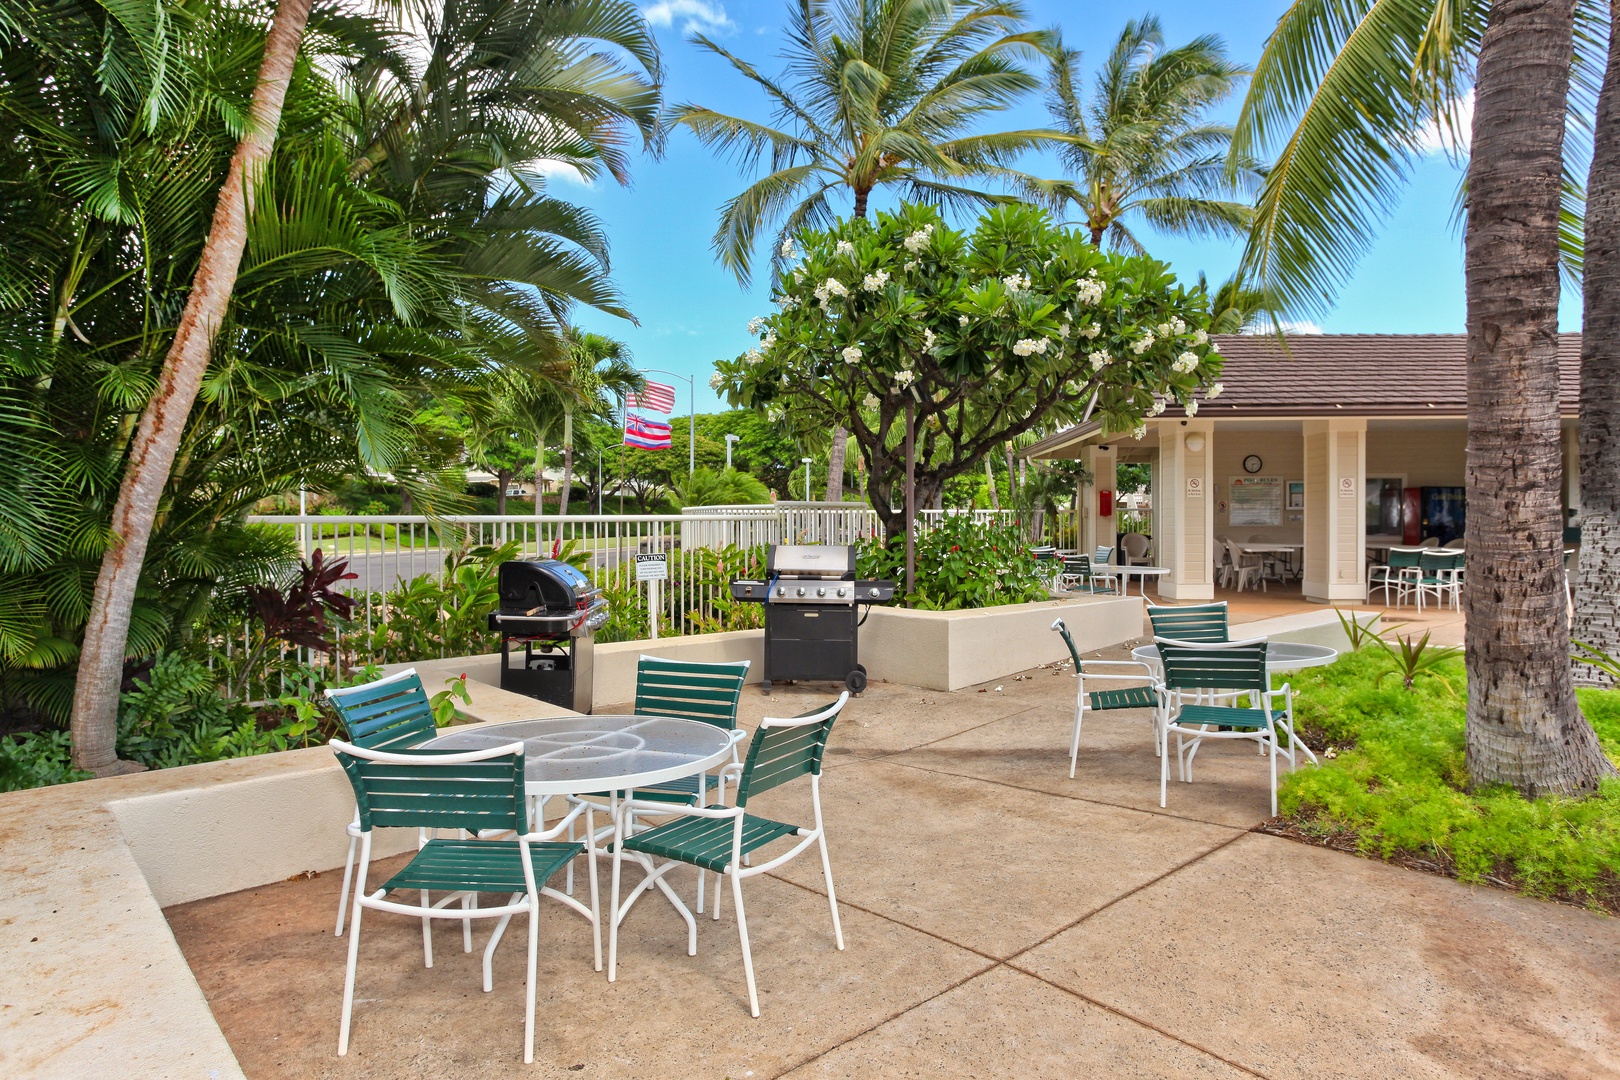 Kapolei Vacation Rentals, Fairways at Ko Olina 4A - Patio seating and BBQ grills near the pool in the fairways at the charming Ko Olina community.